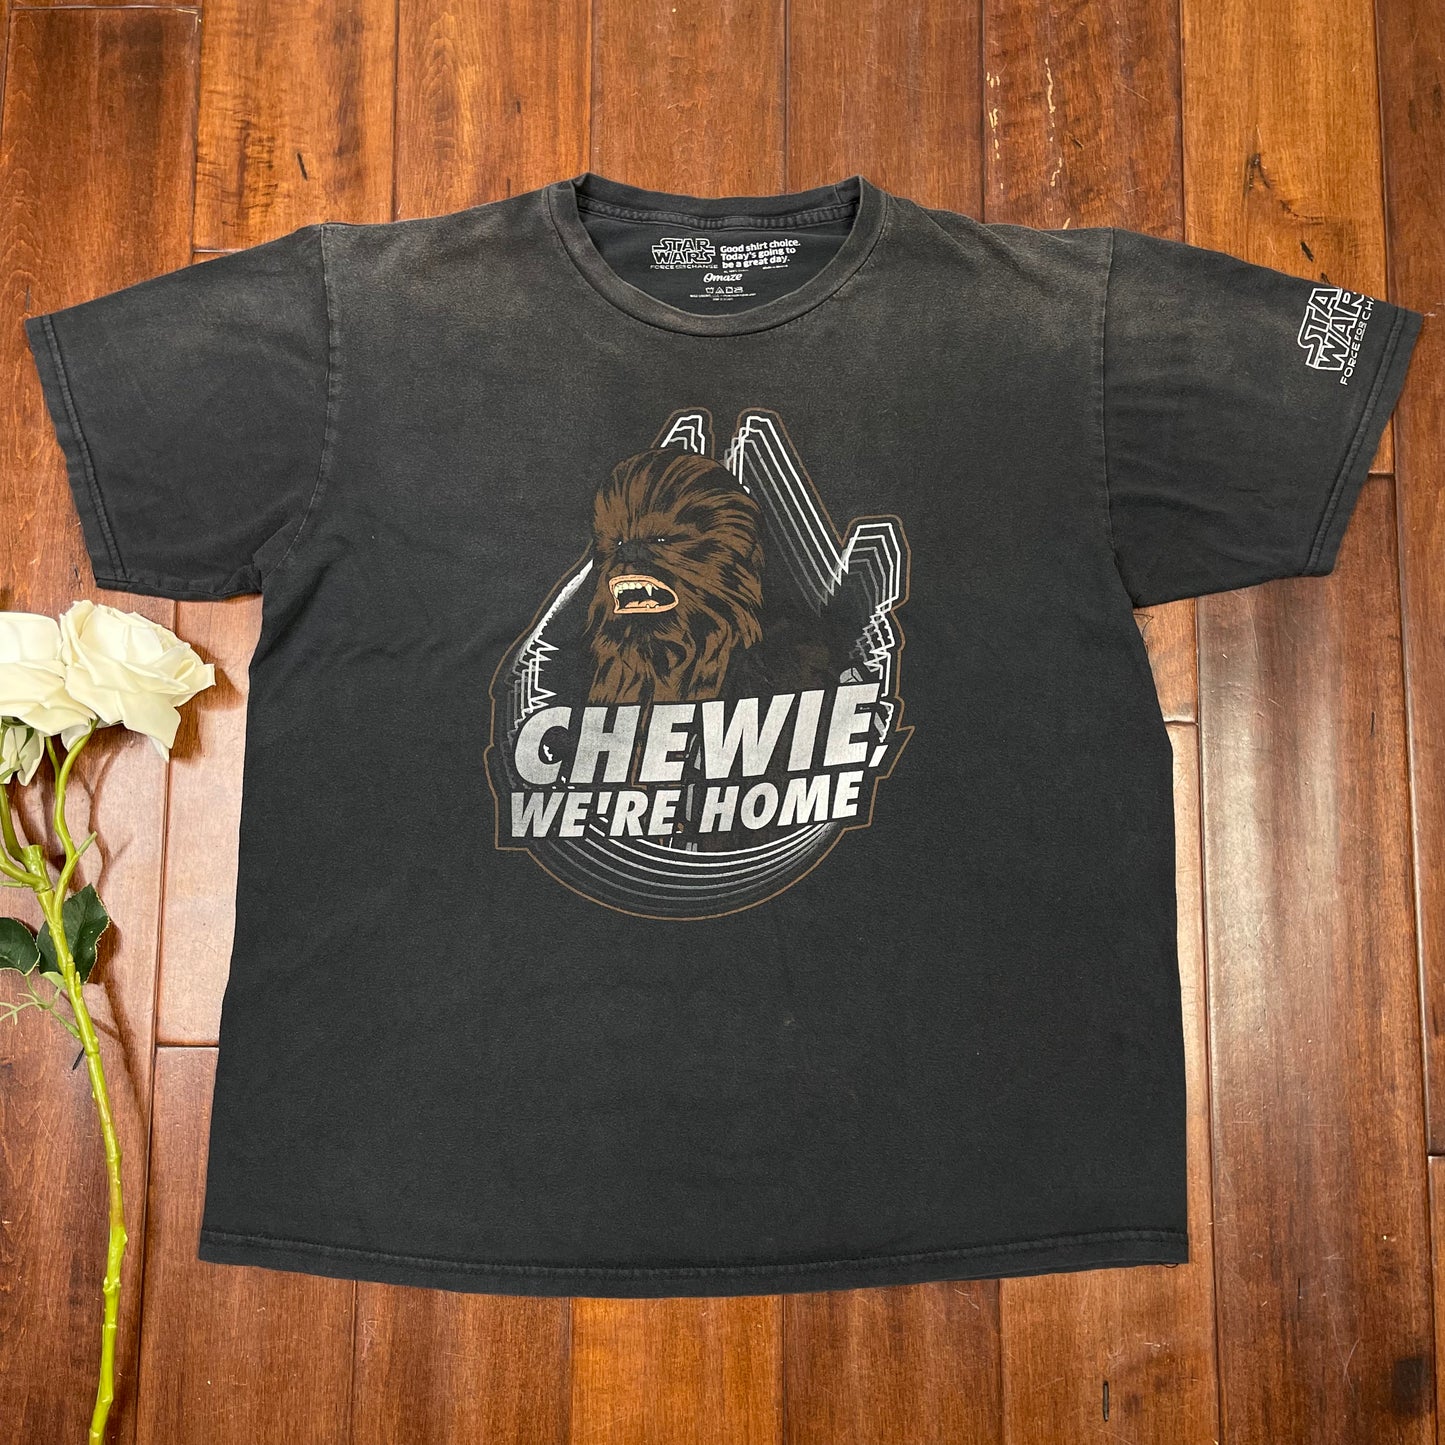 THRIFTED “CHEWIE WE’RE HOME” T-SHIRT